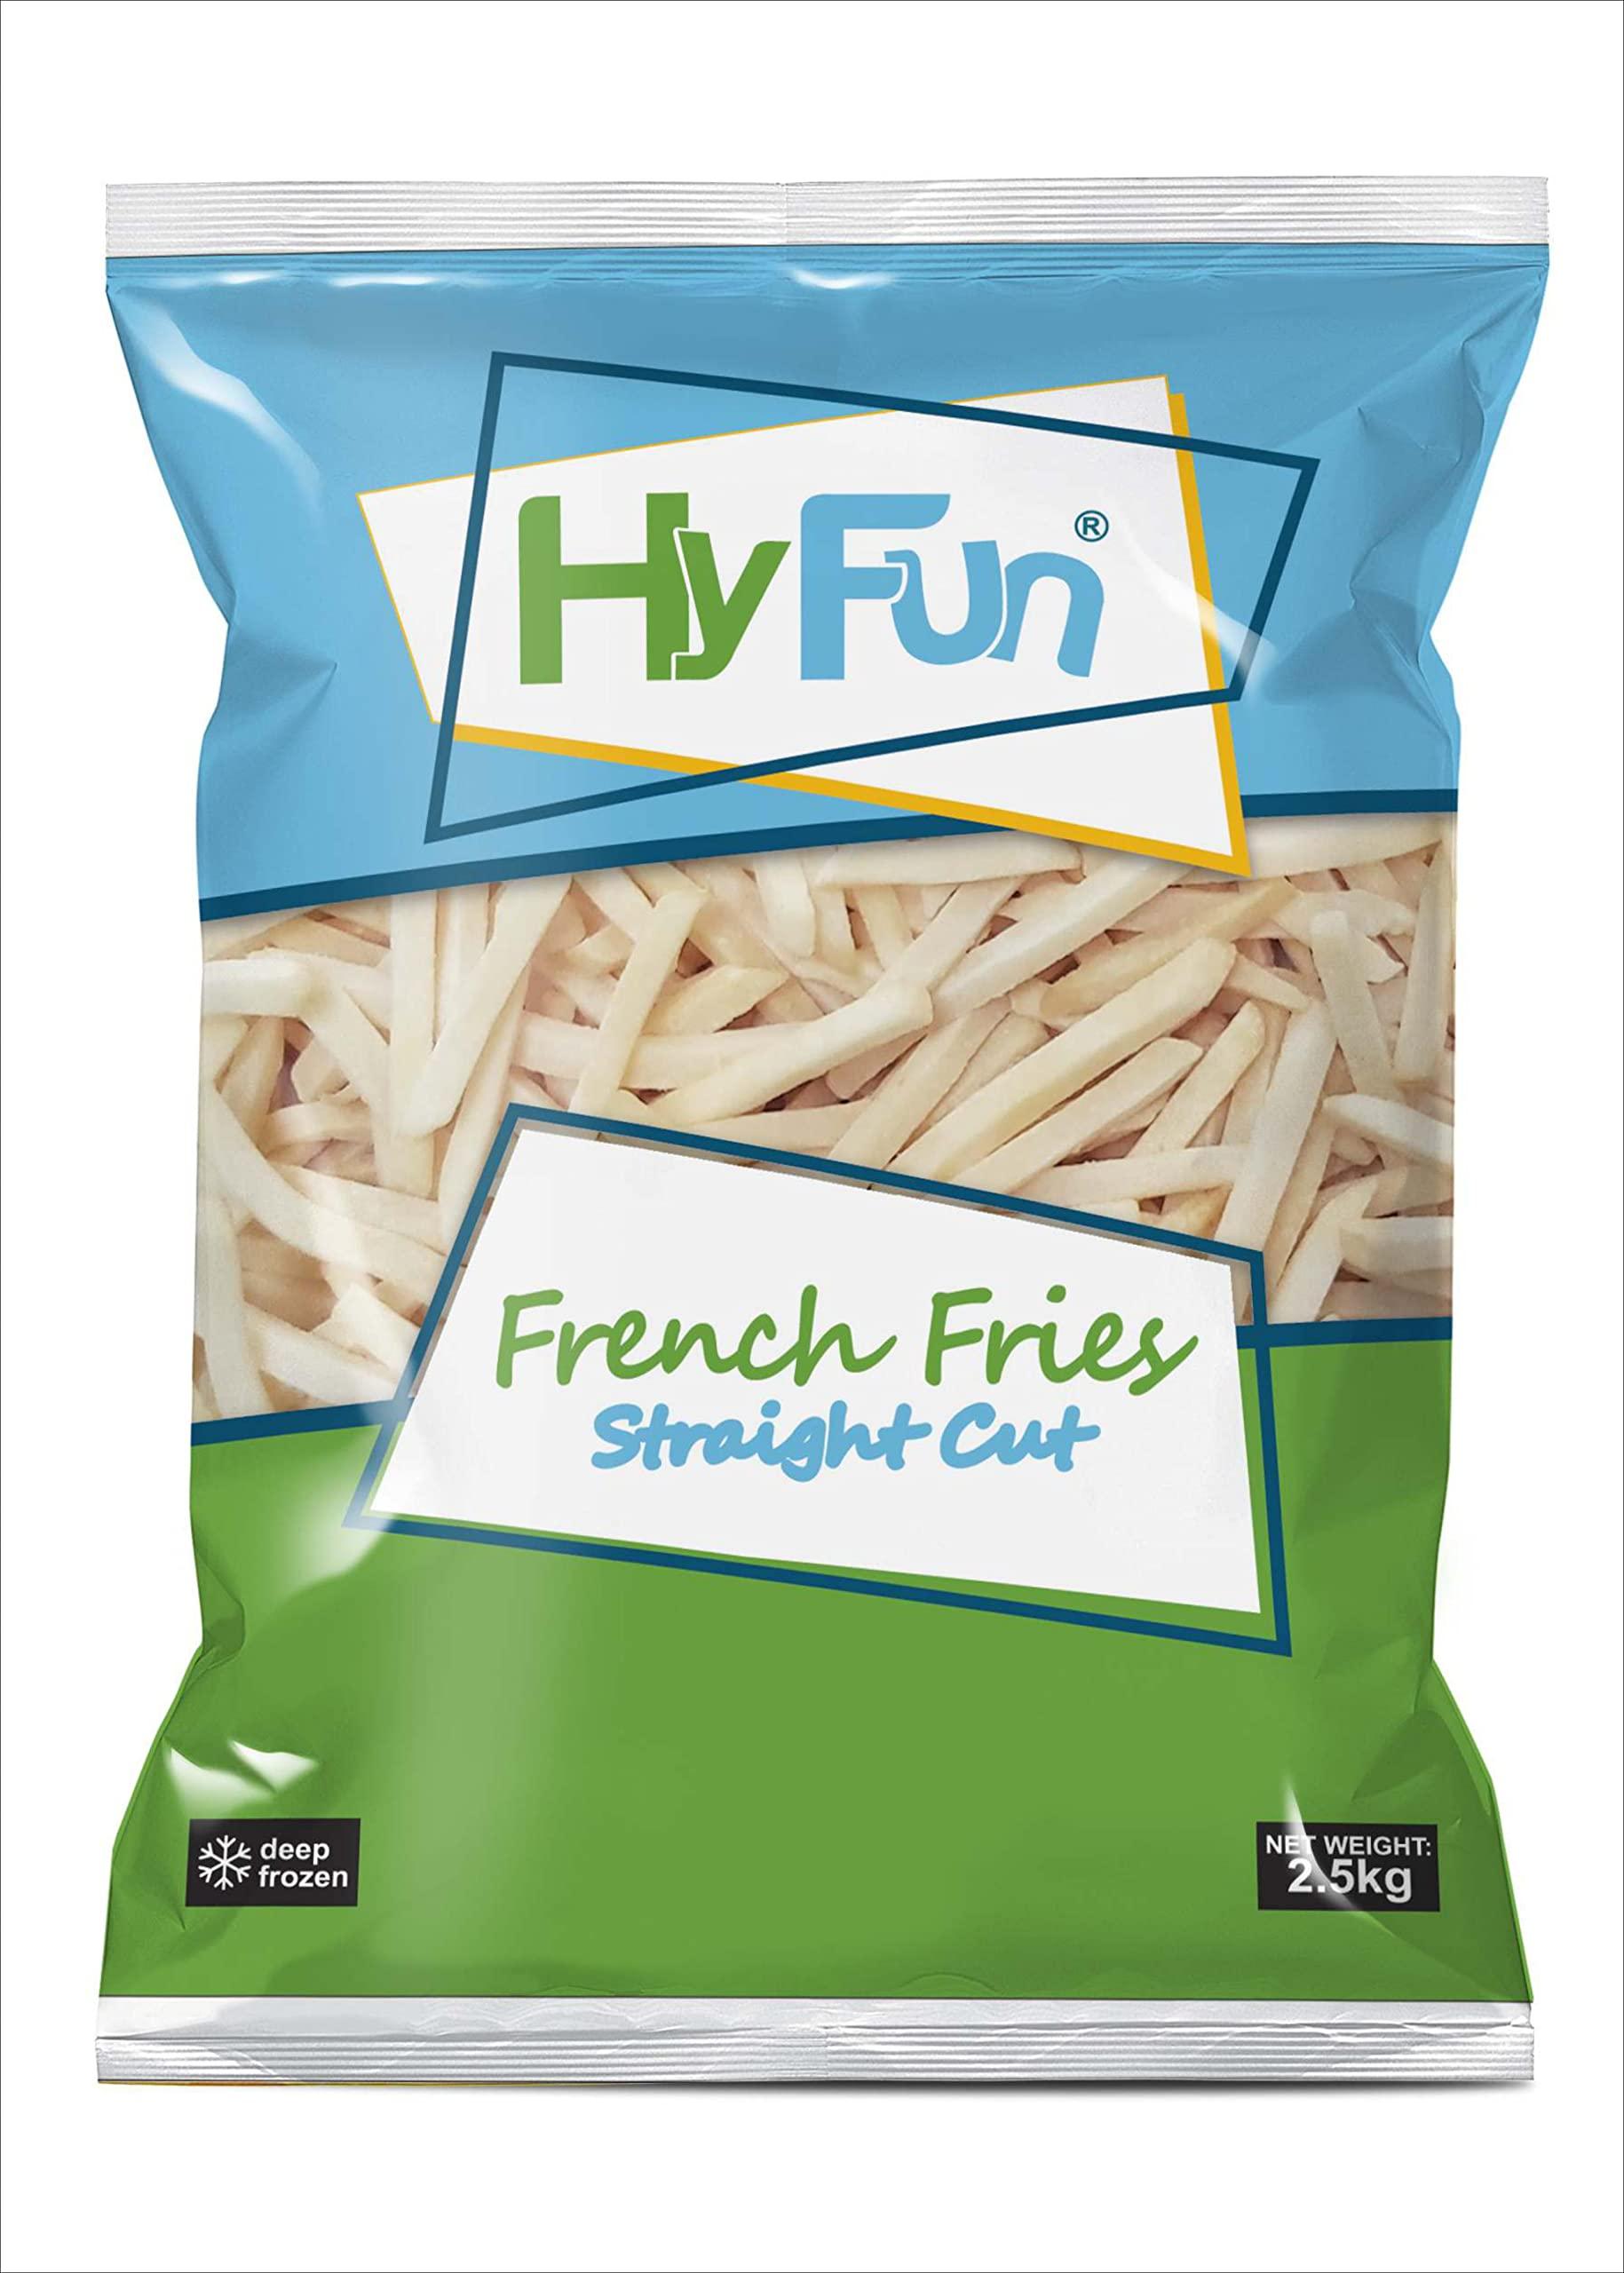 Hyfun French Fries Staight Cut * 2.5KG